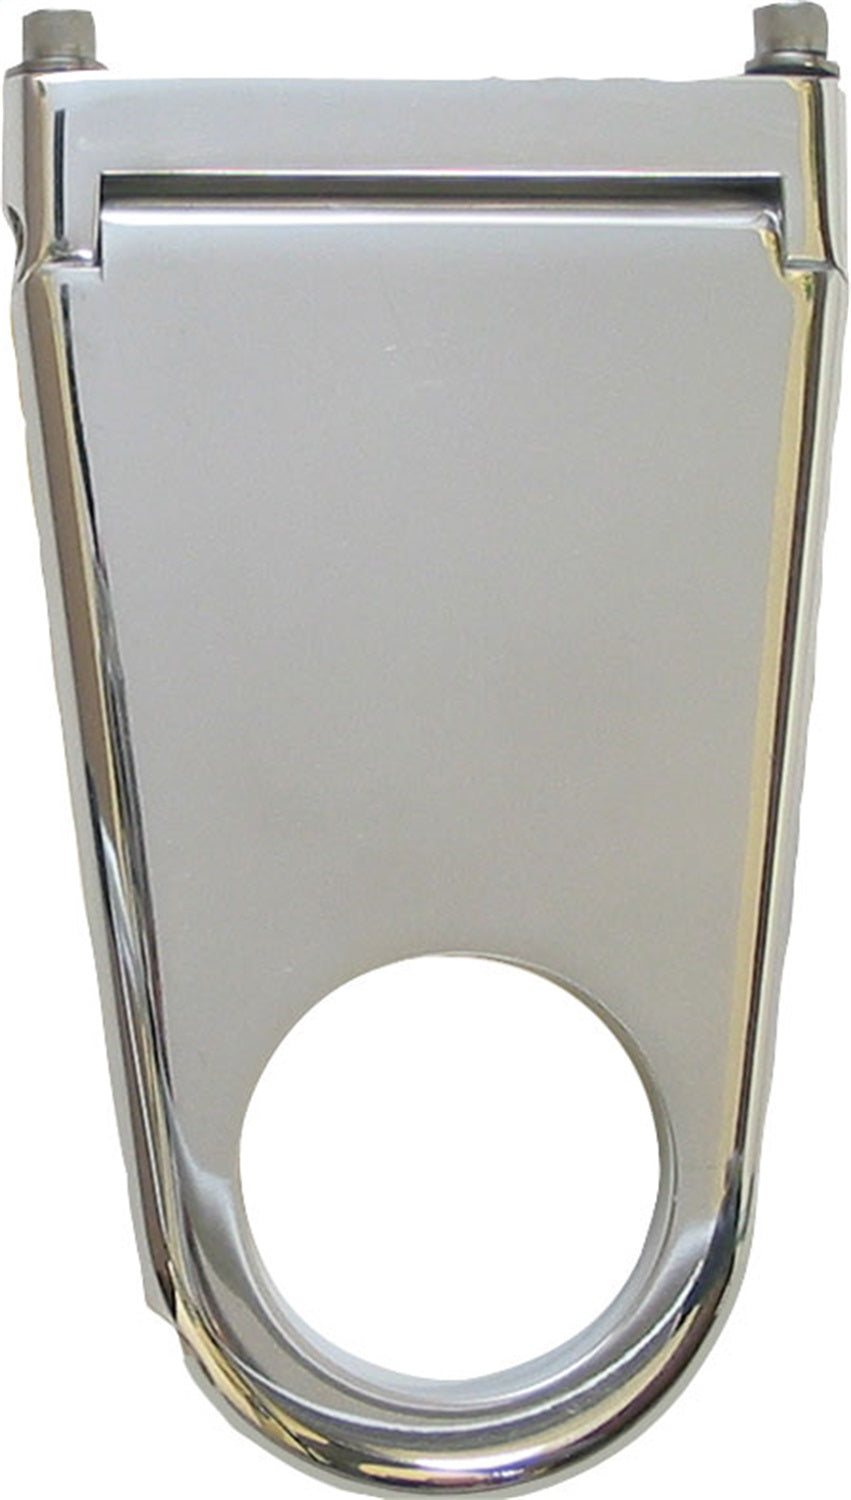 Borgeson Column Drop Blank Style 1-3/4in. Column X 4in. Drop Polished Aluminum 911174